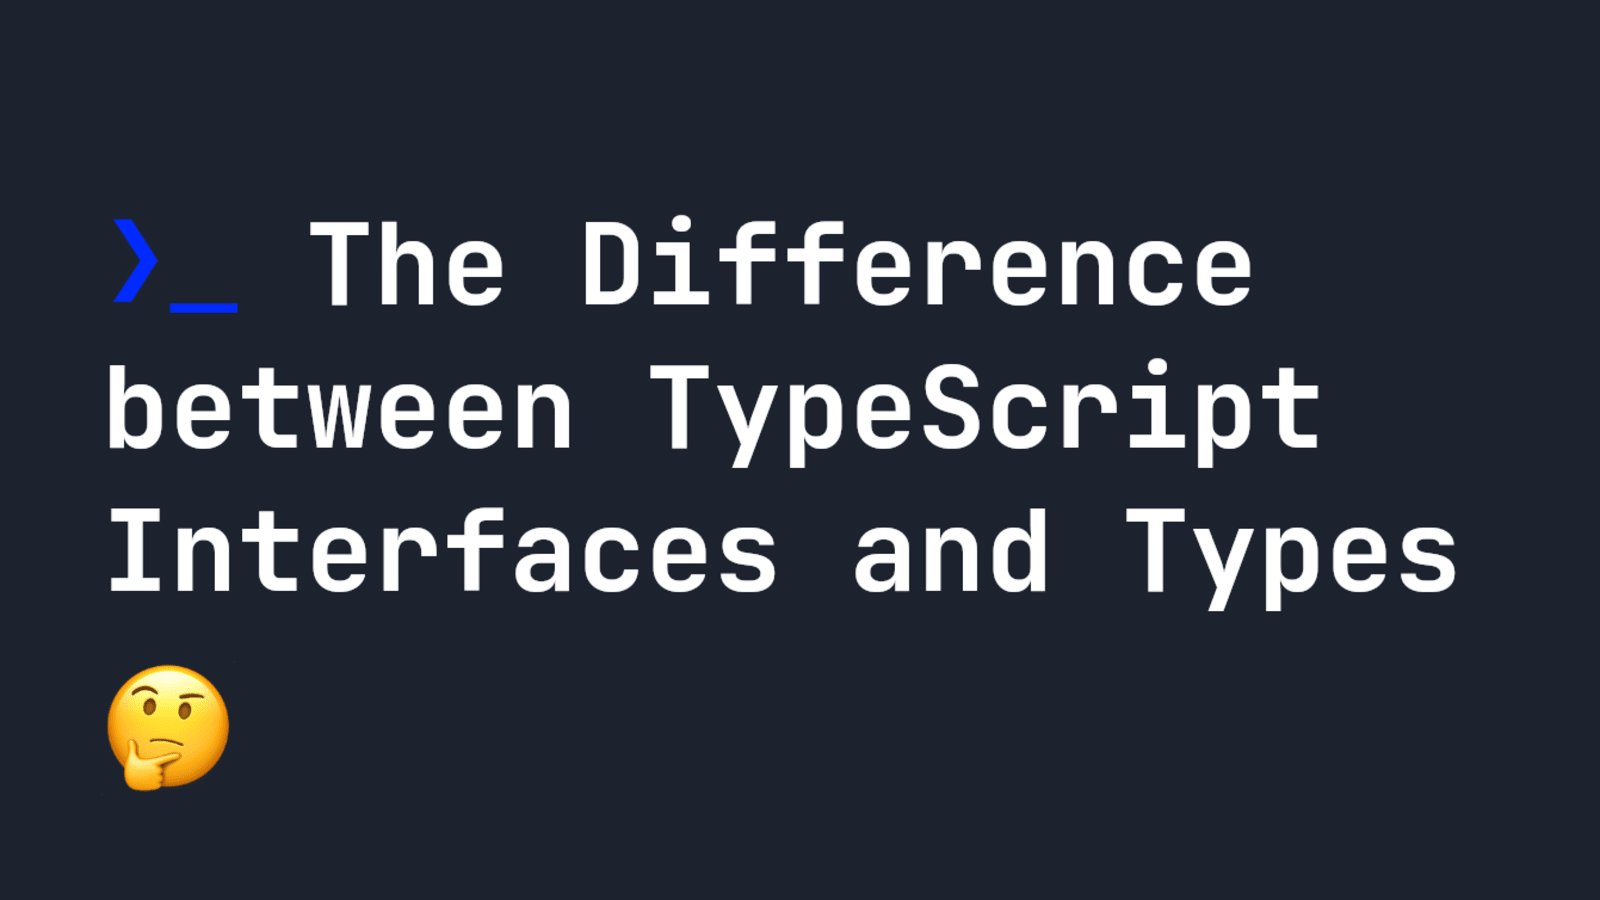 Extends interface and type in typescript